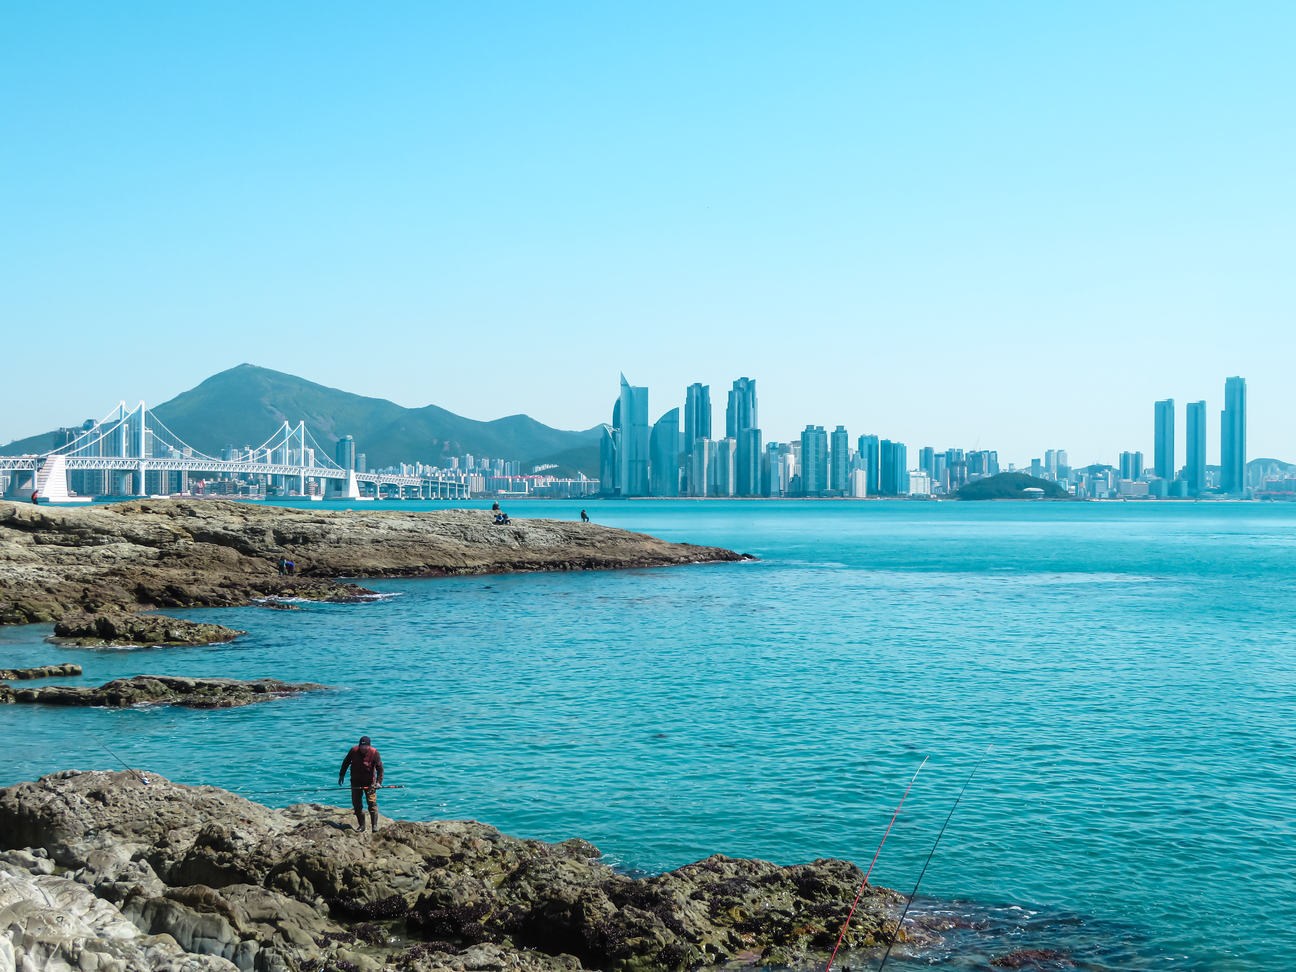 hiking the Igidae Coastal Walk is a must do activity during a solo trip to Busan